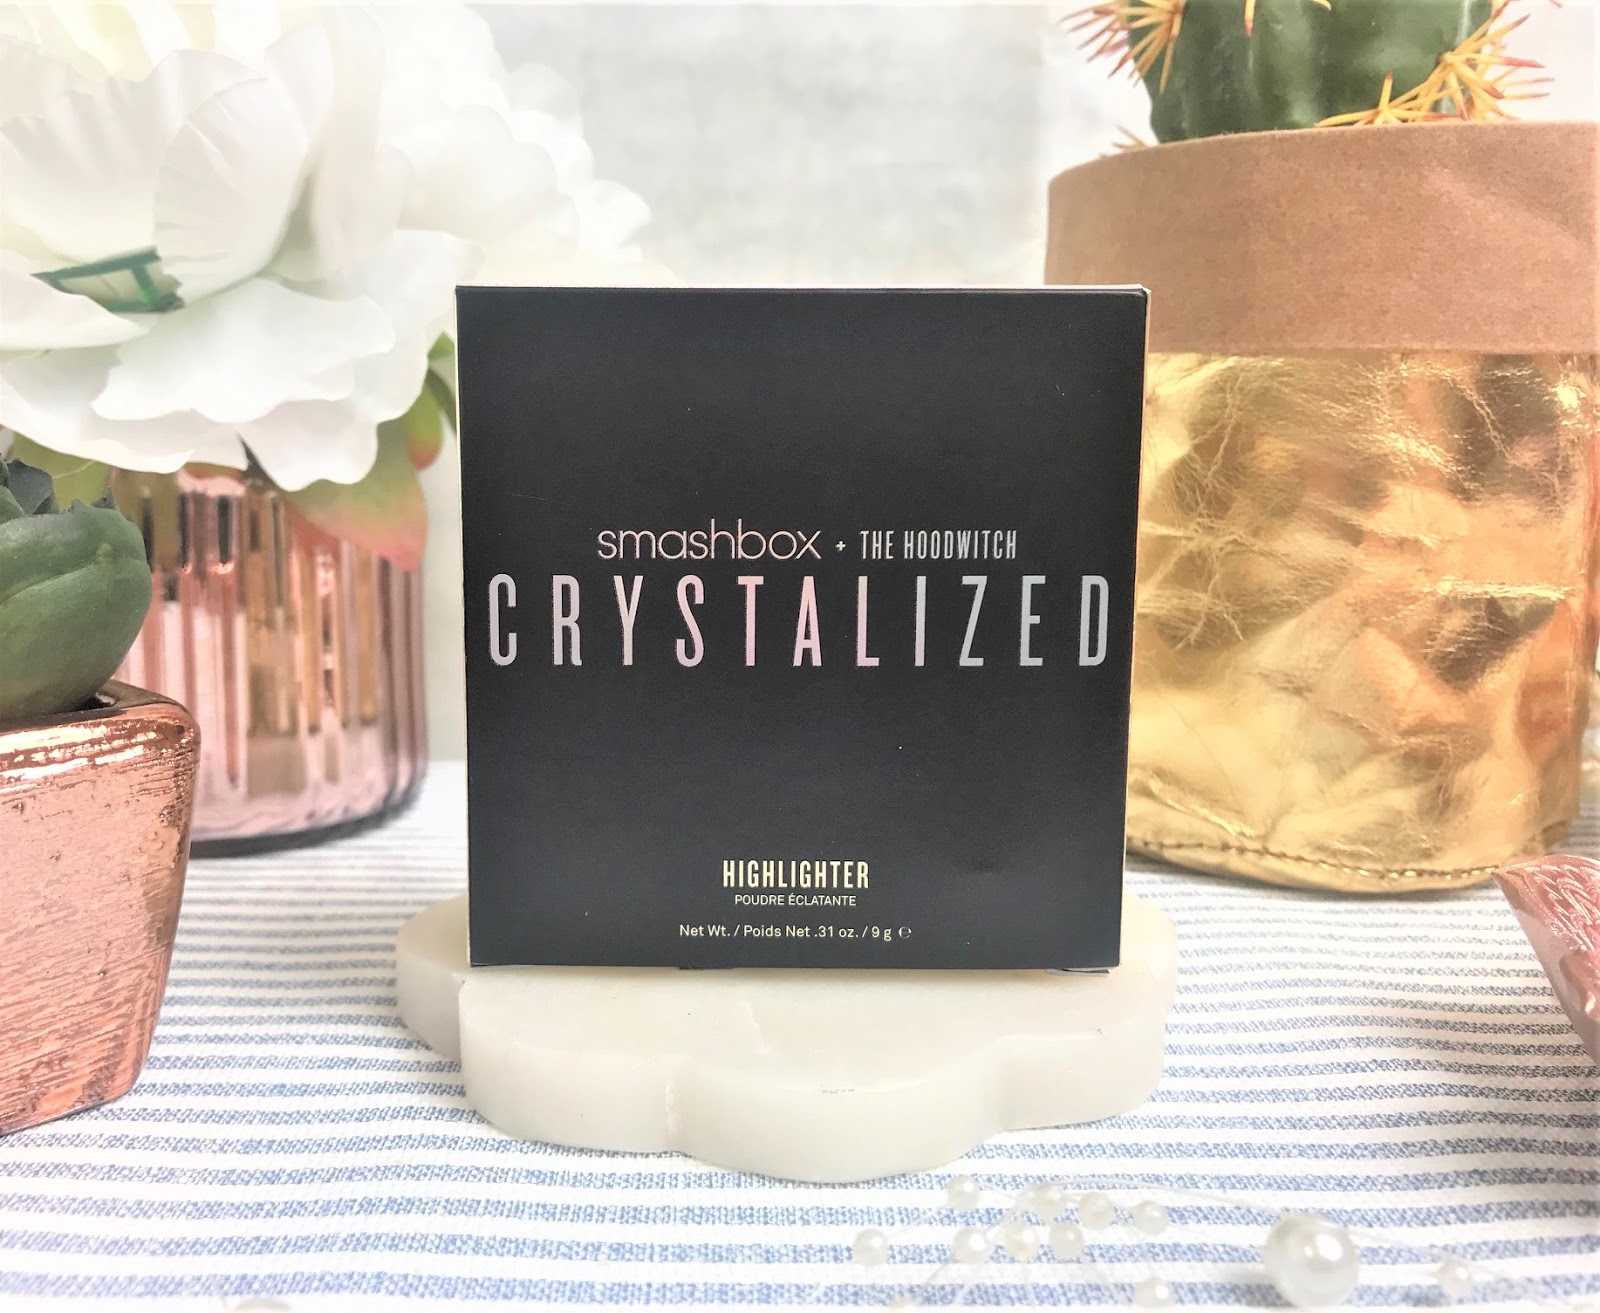 Kathryn's Loves: Smashbox + The Hoodwitch Crystallized Highlighter